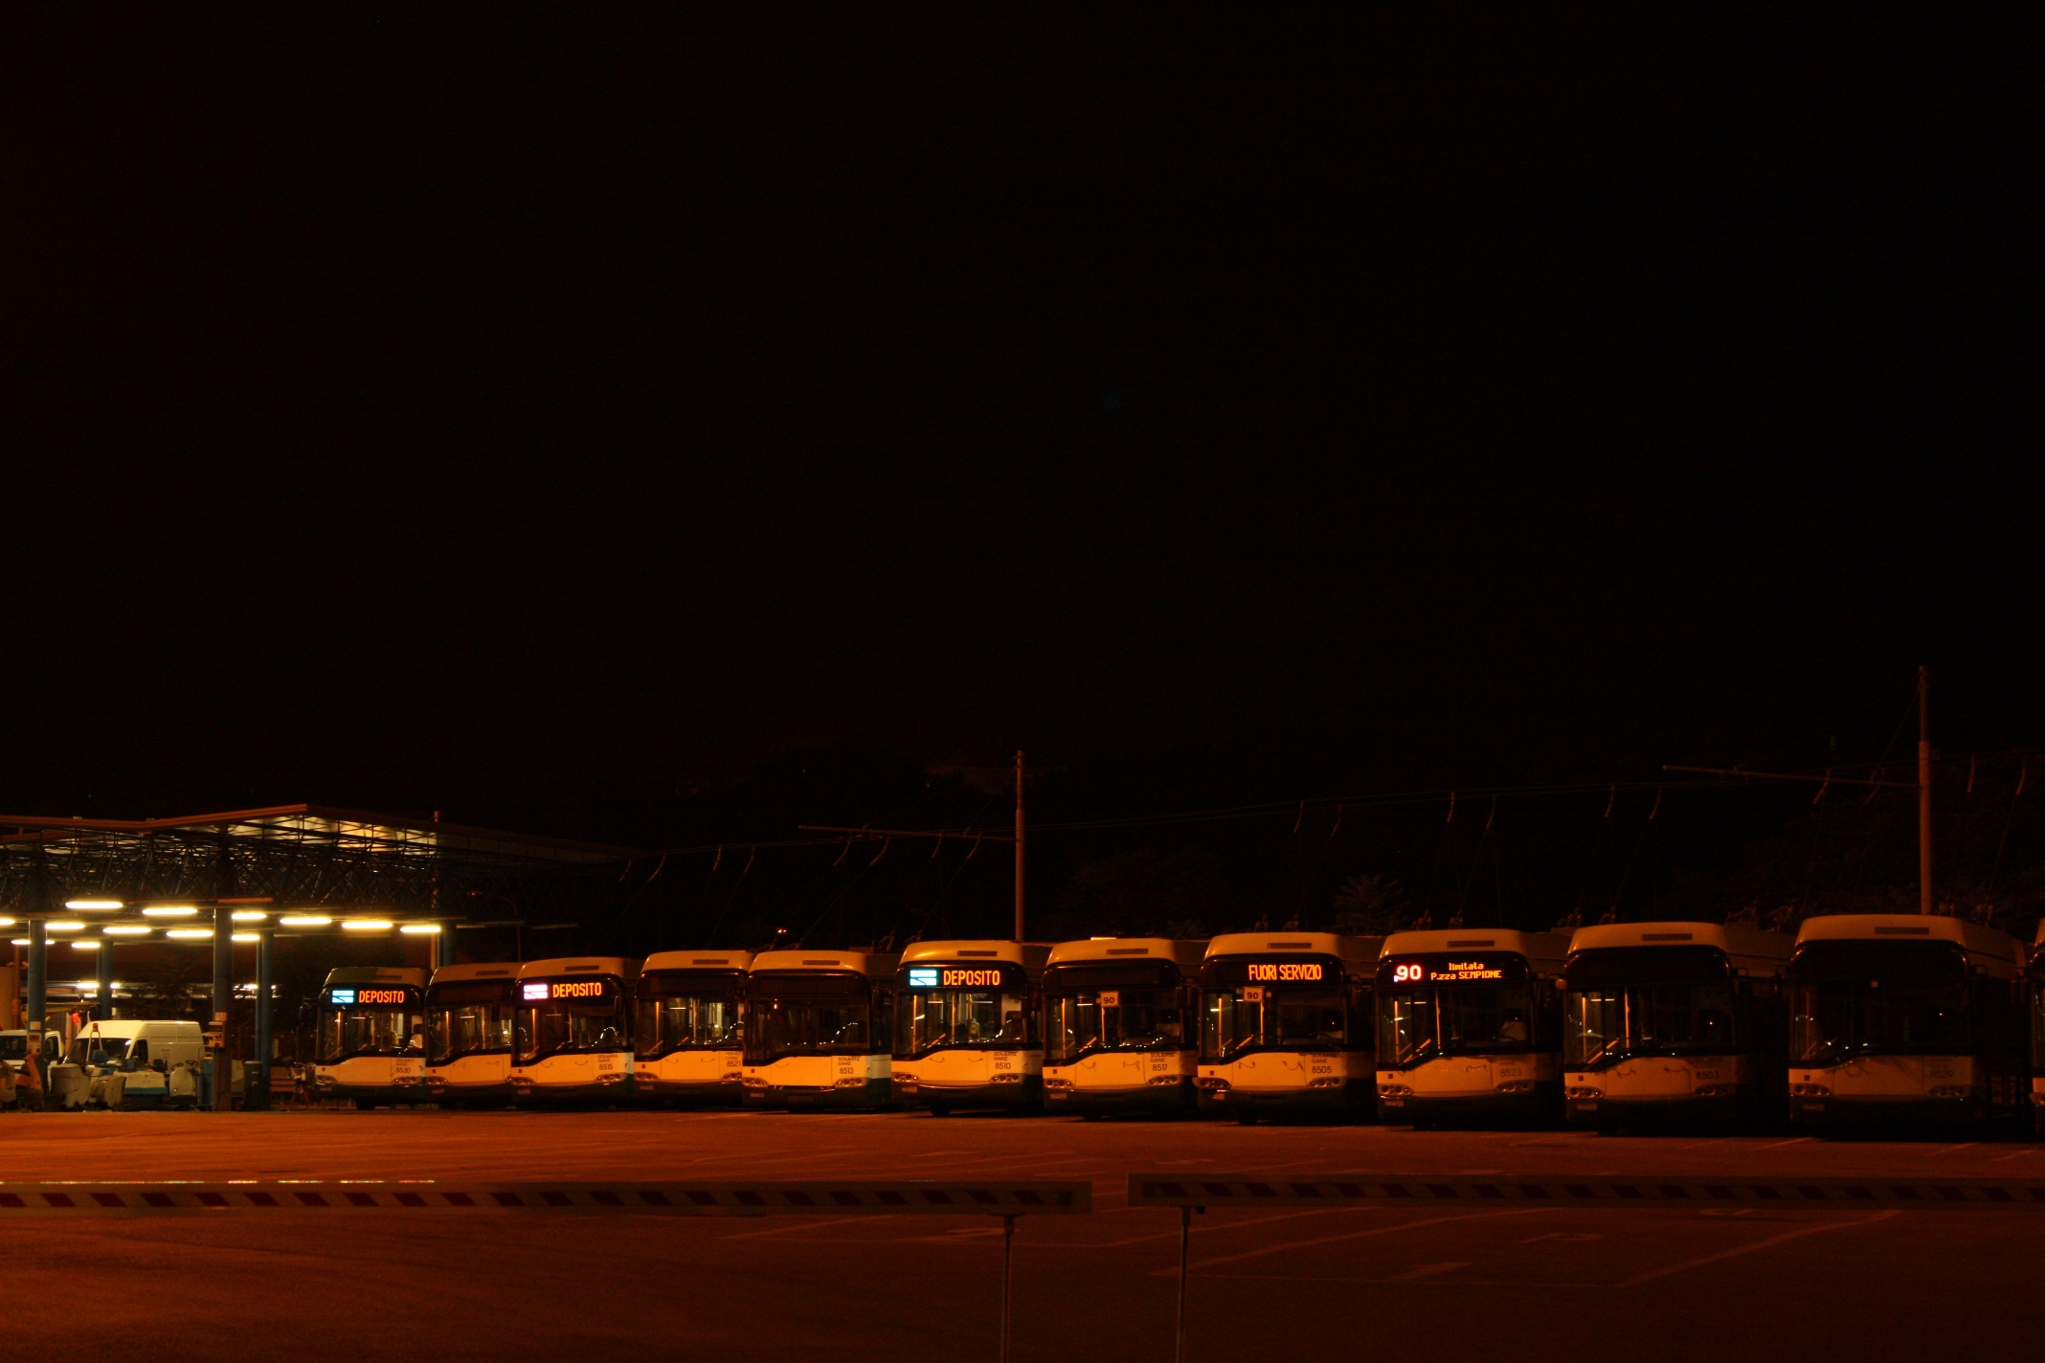 a bus yard at night with lots of buses parked